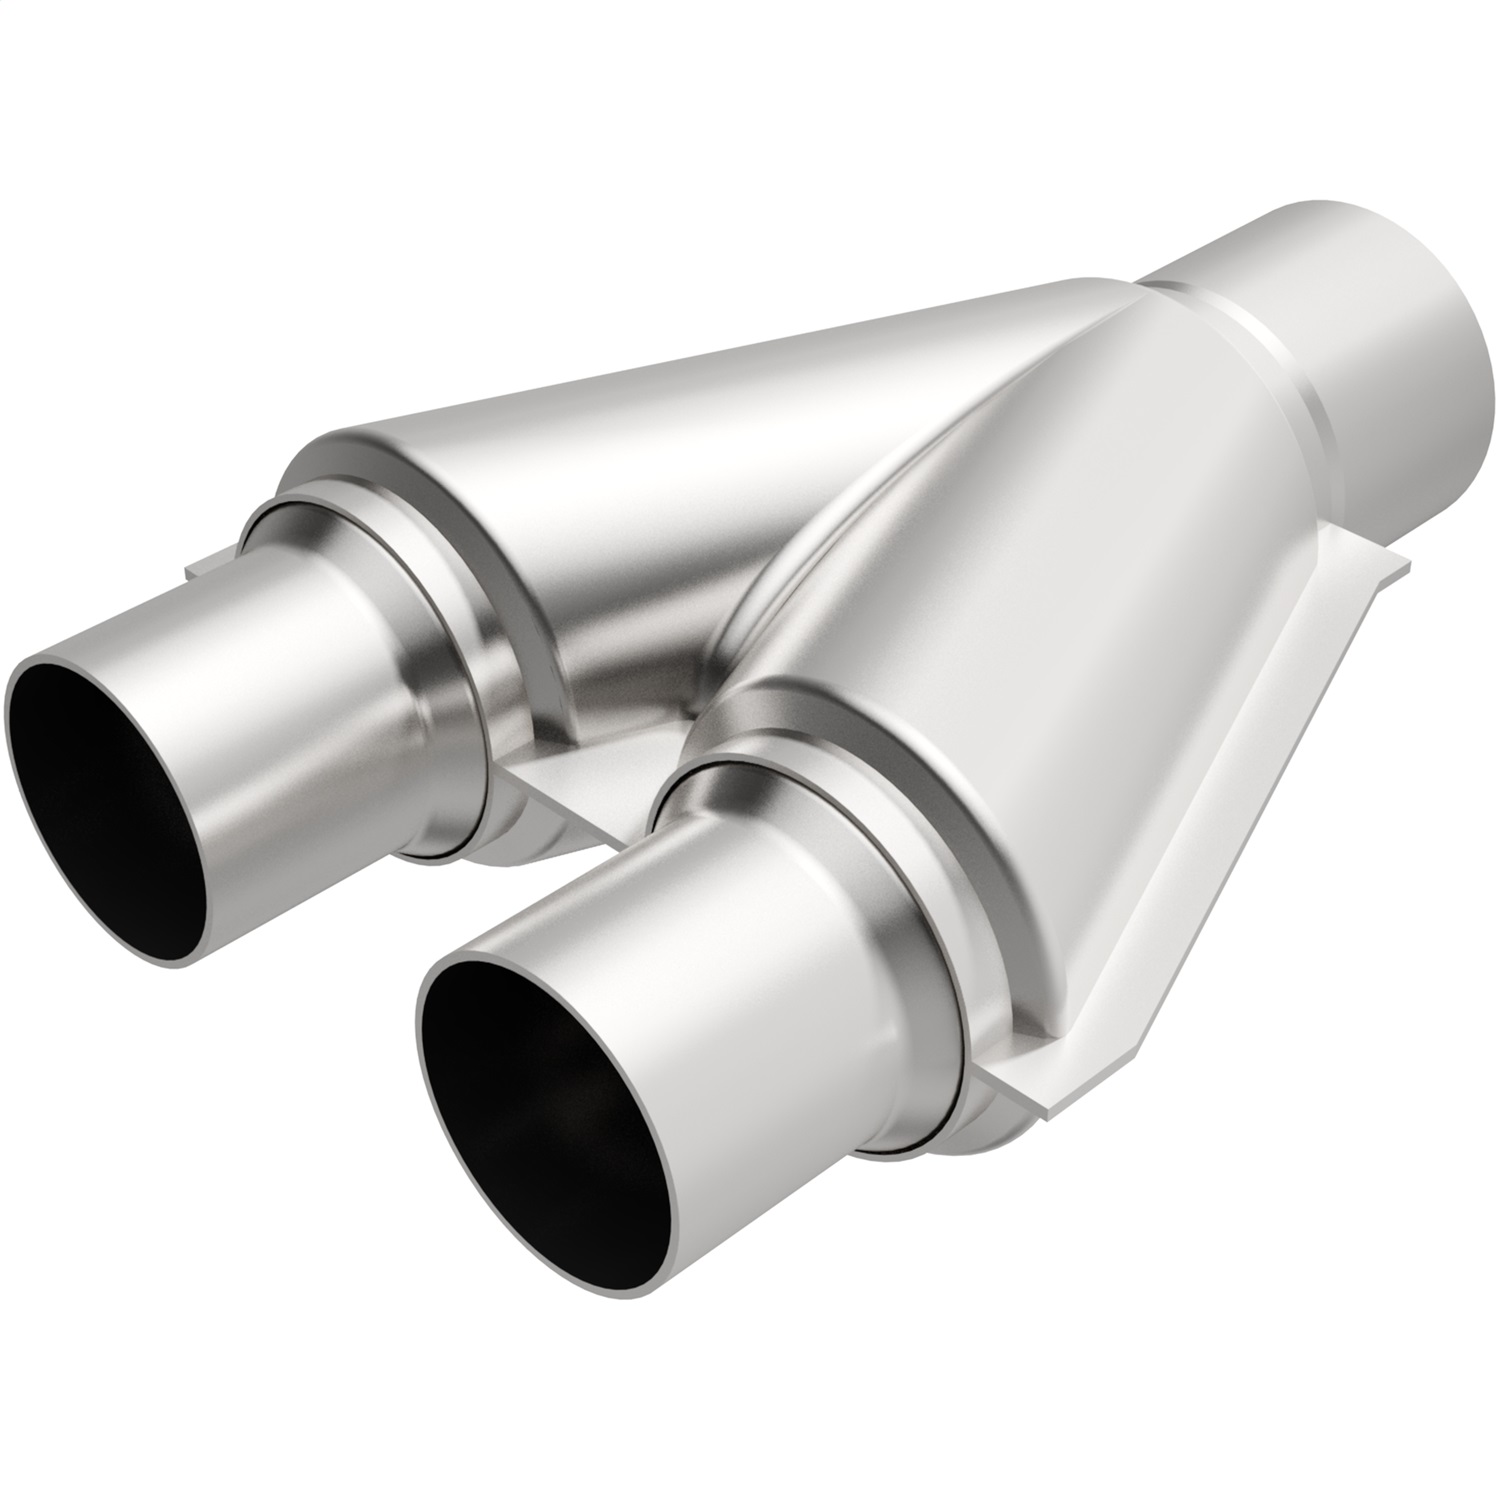 Magnaflow Performance Exhaust Magnaflow Performance Exhaust 10778 Stainless Steel Y-Pipe